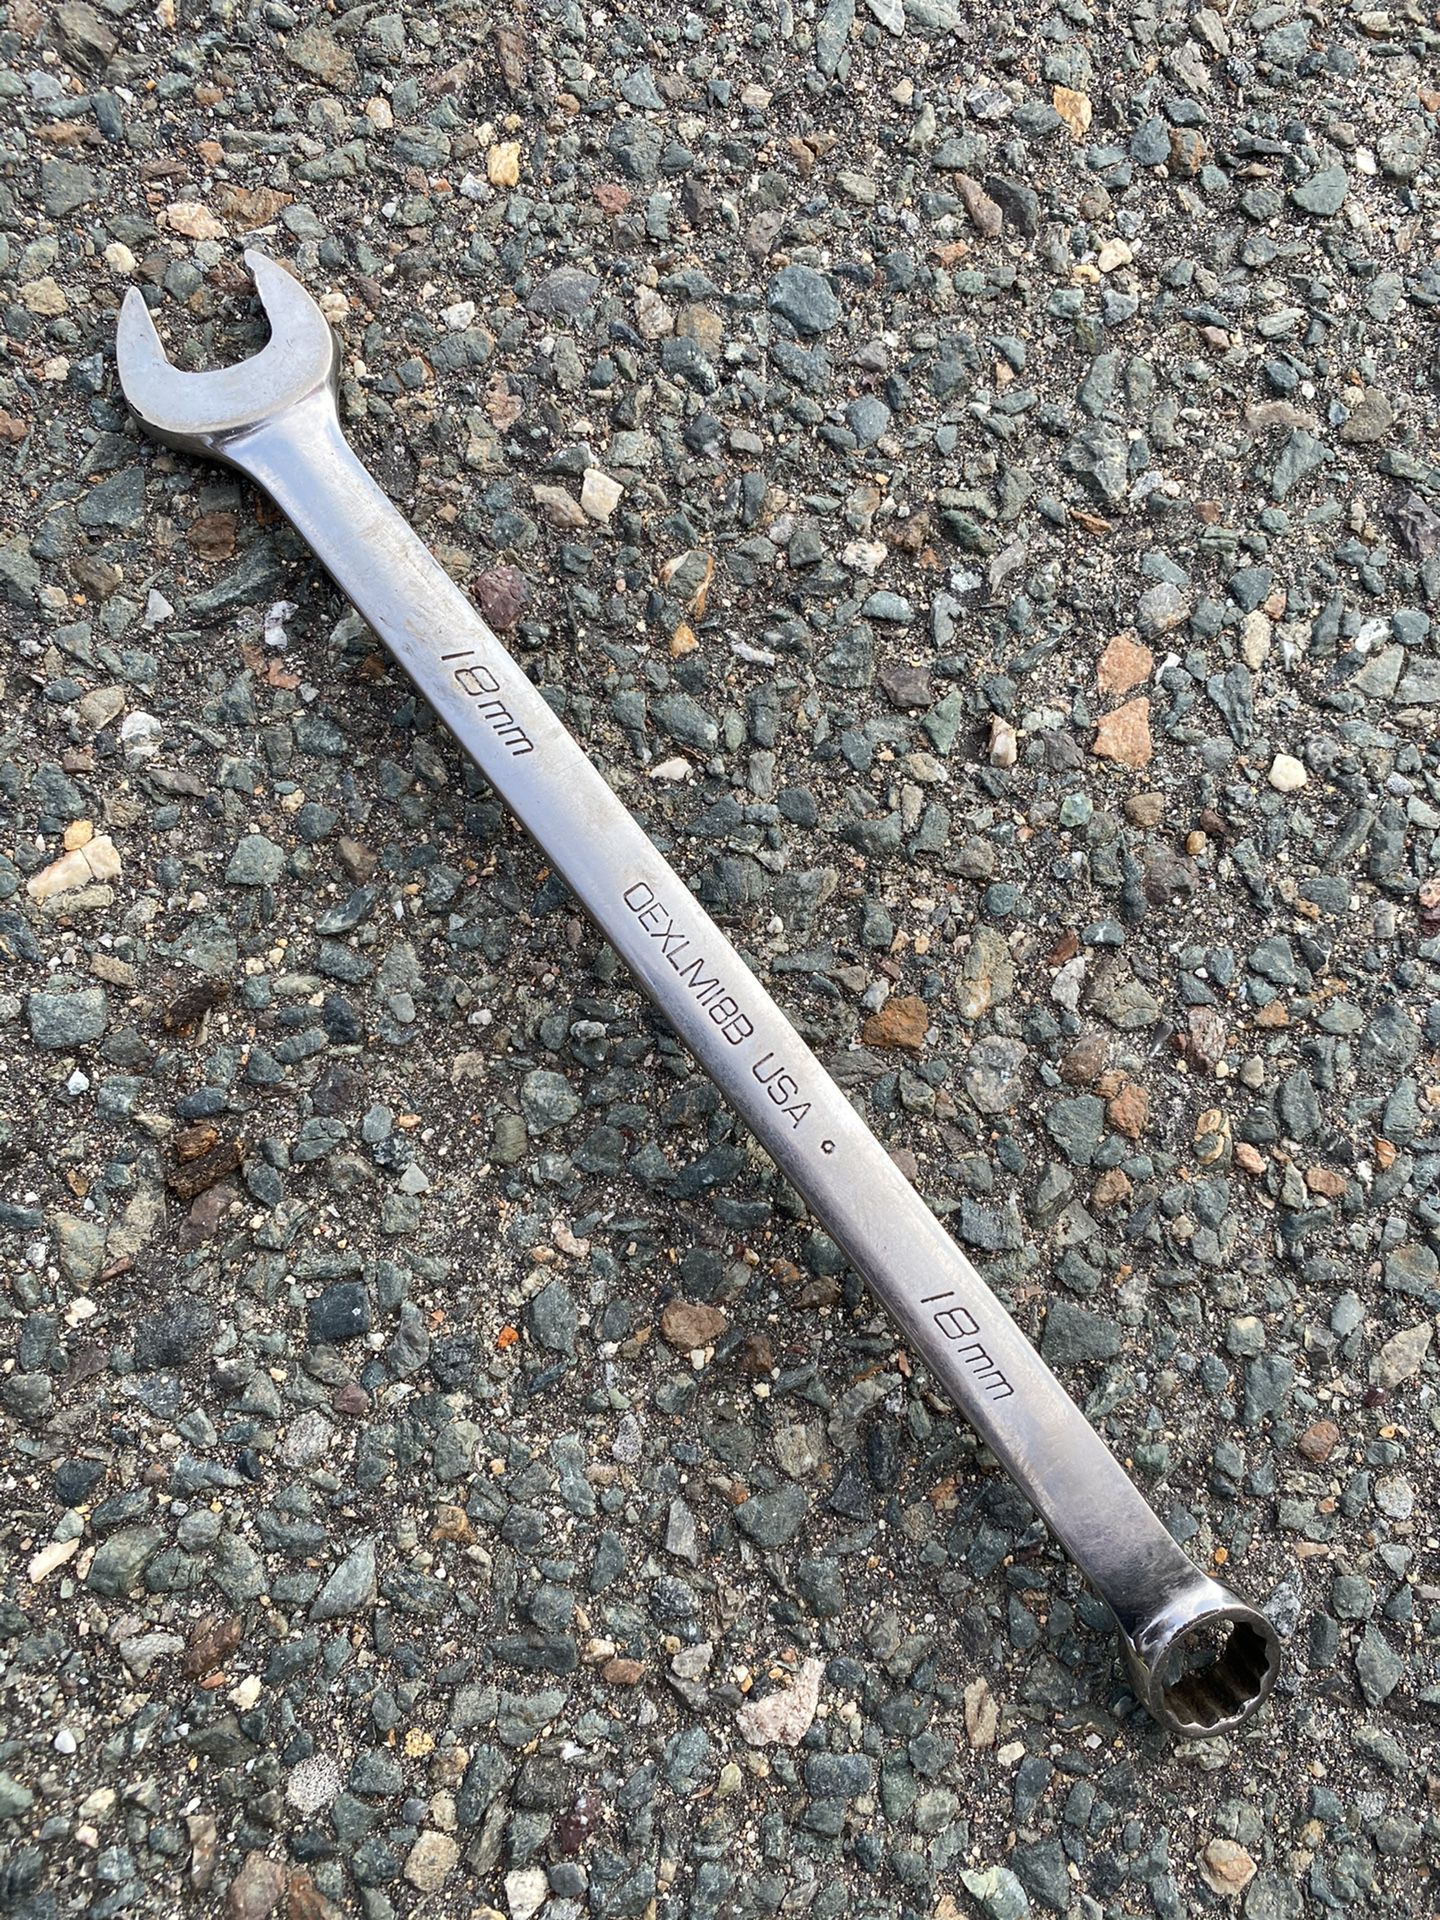 Snap on wrench